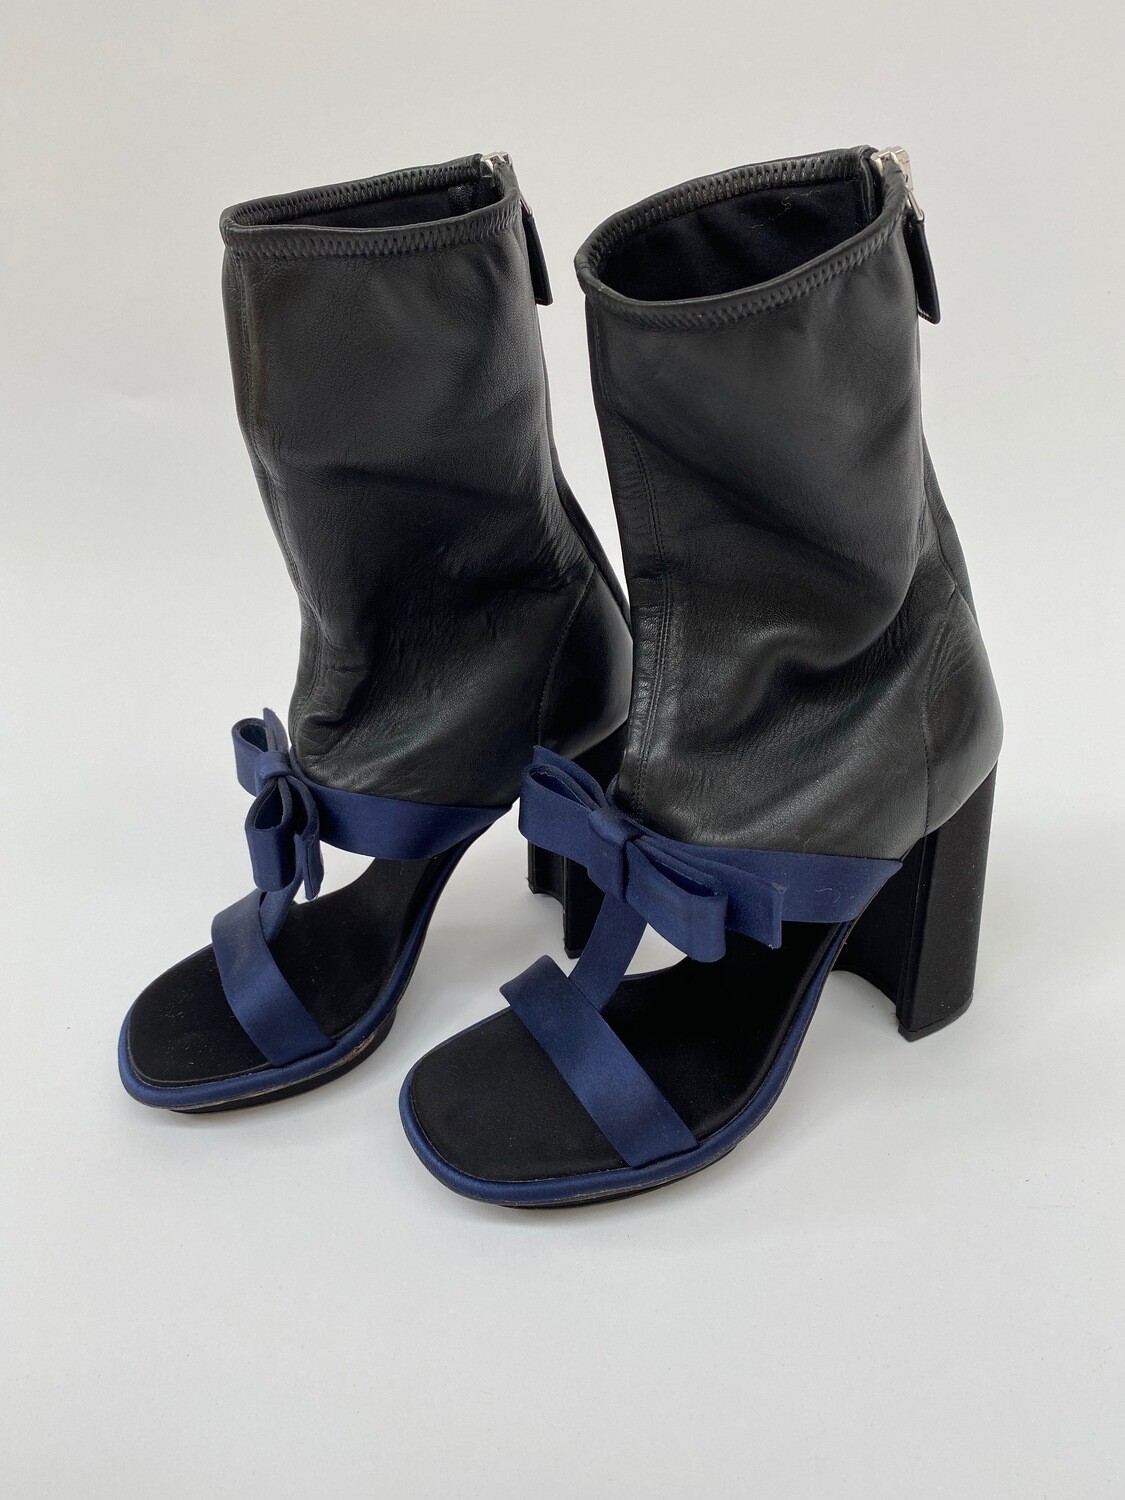 PRADA BLACK NAVY SOCK BOOTS WITH BOW DETAIL 37.5